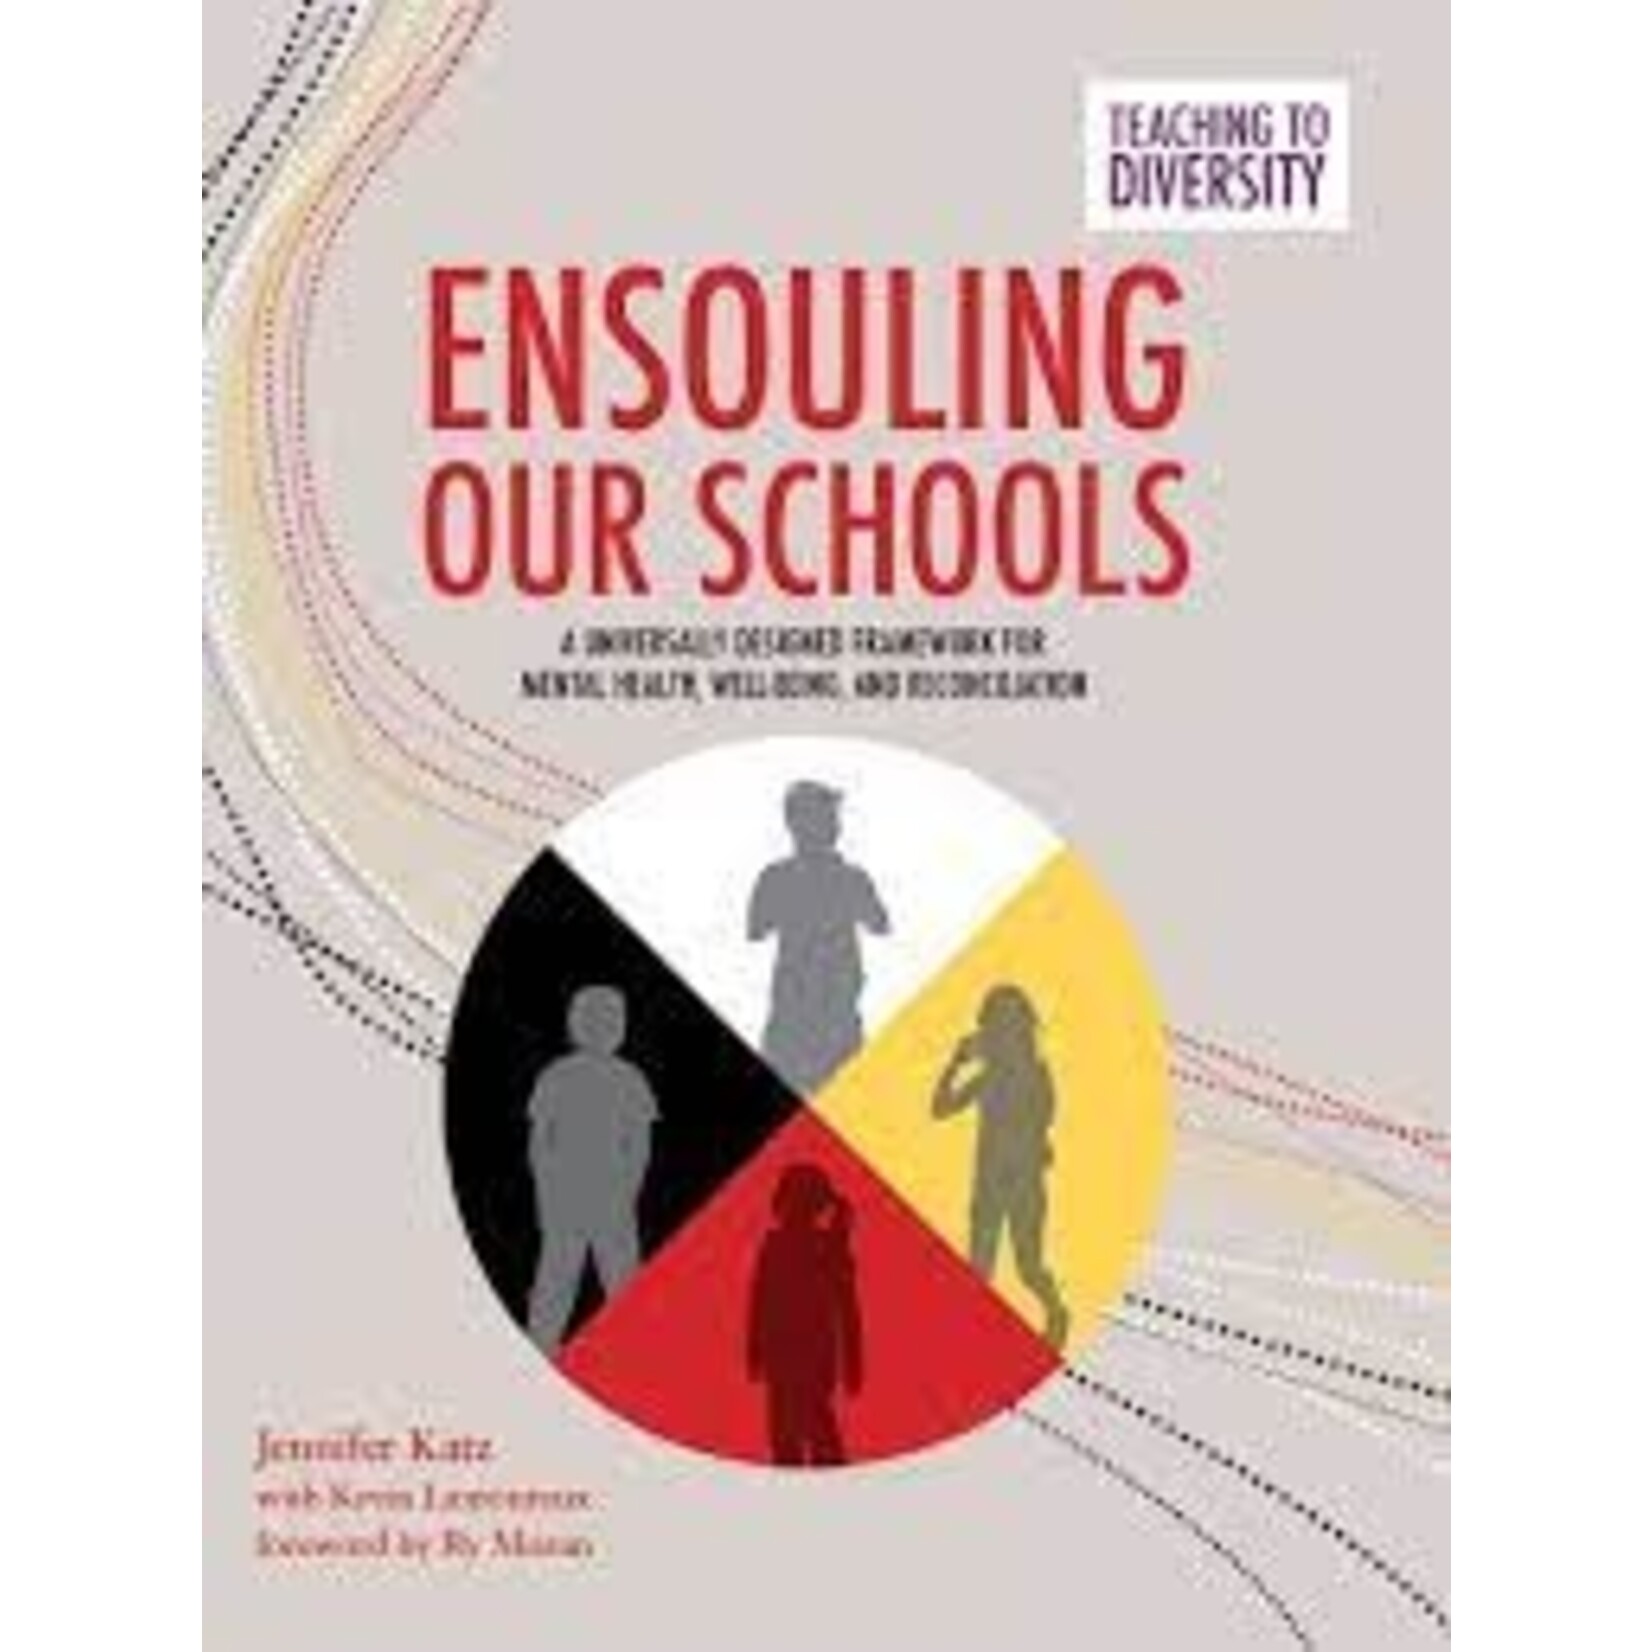 Ensouling Our Schools